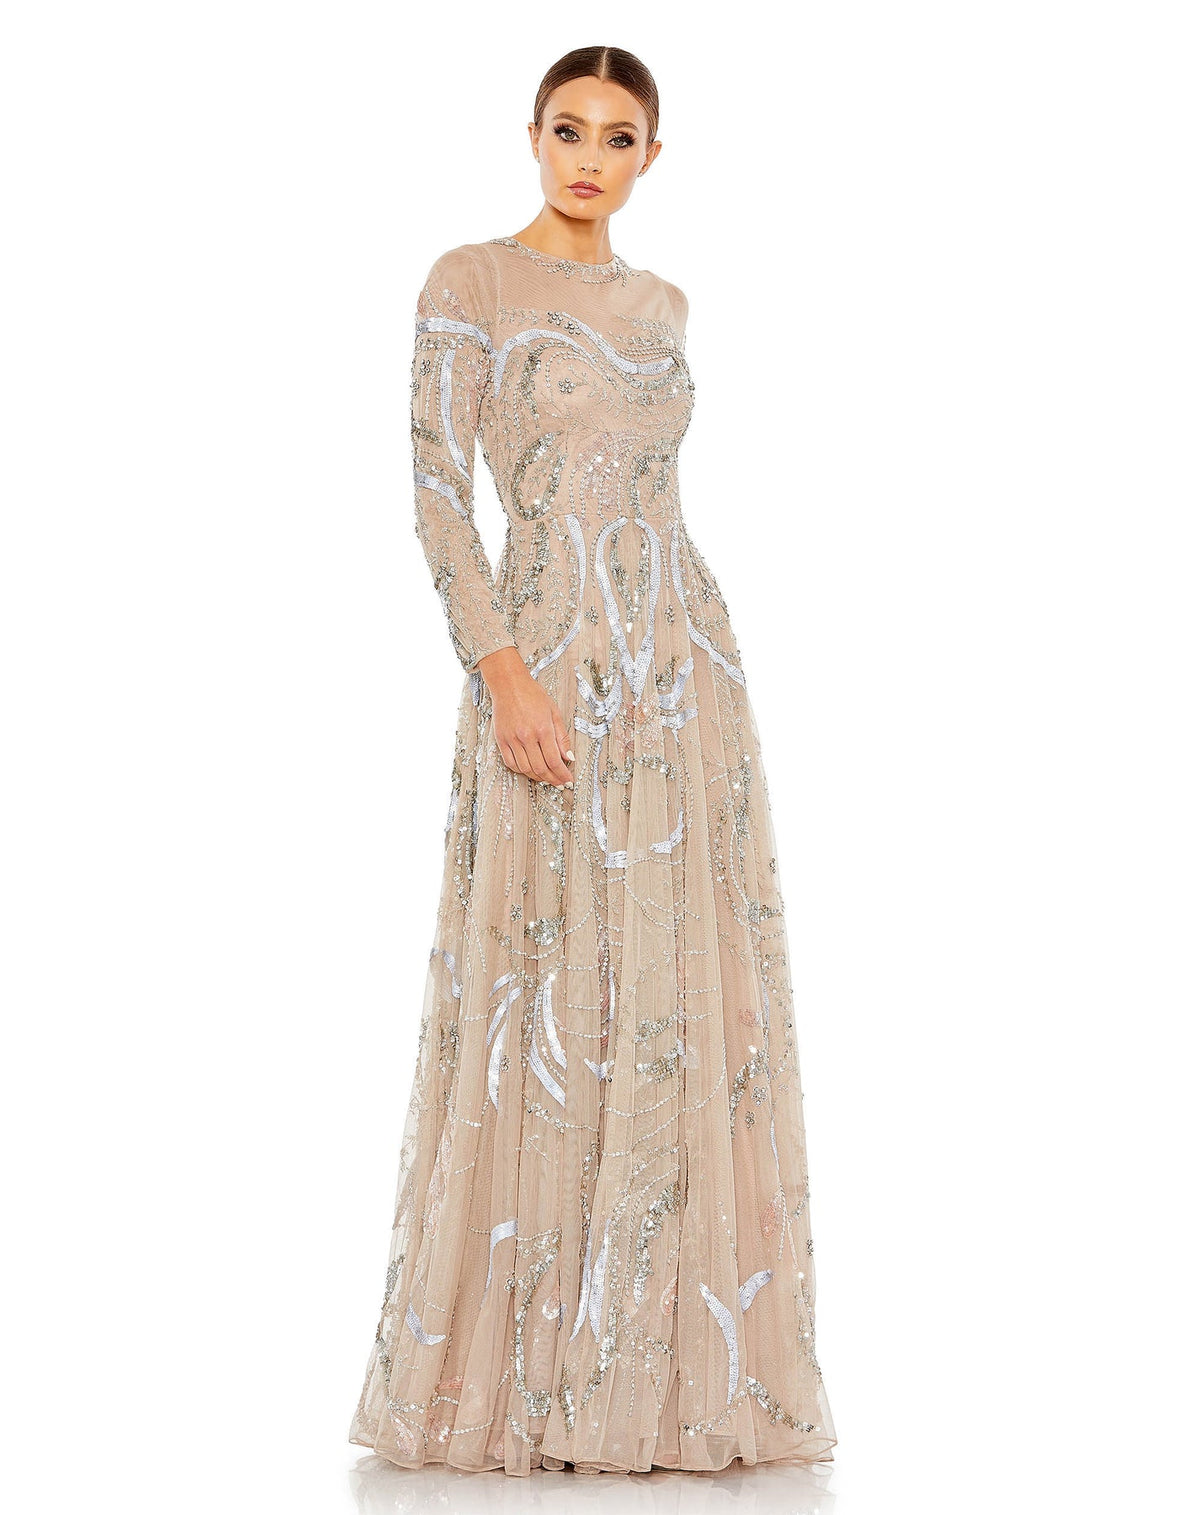 Mac Duggal, LONG SLEEVE EMBELLISHED ILLUSION EVENING GOWN, Style #5217, modest evening gown